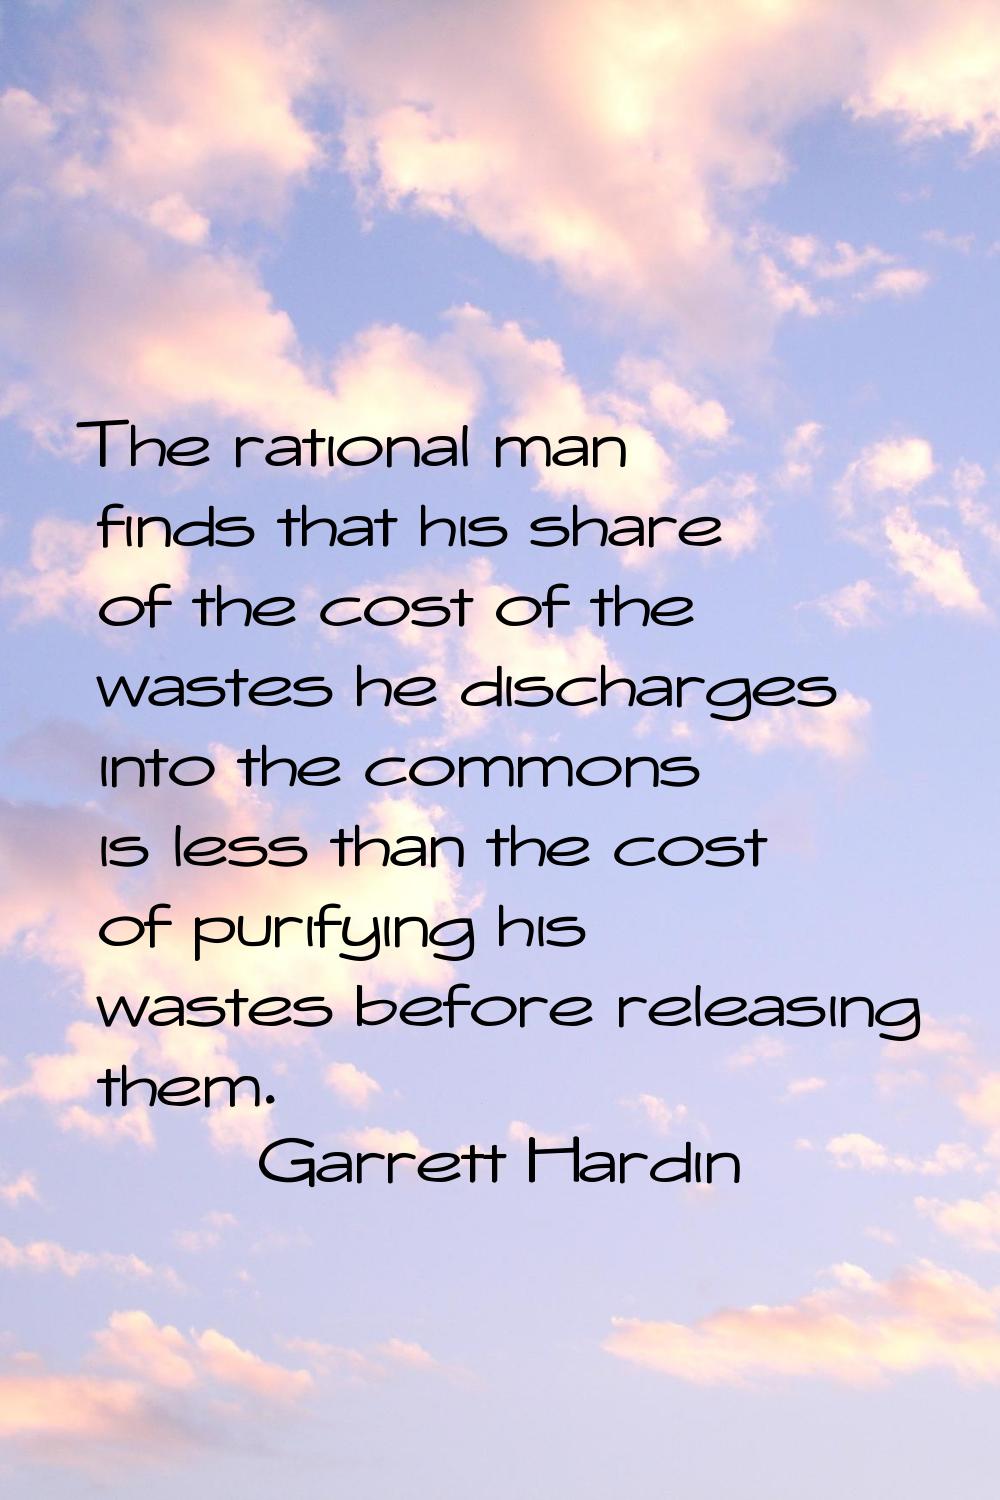 The rational man finds that his share of the cost of the wastes he discharges into the commons is l